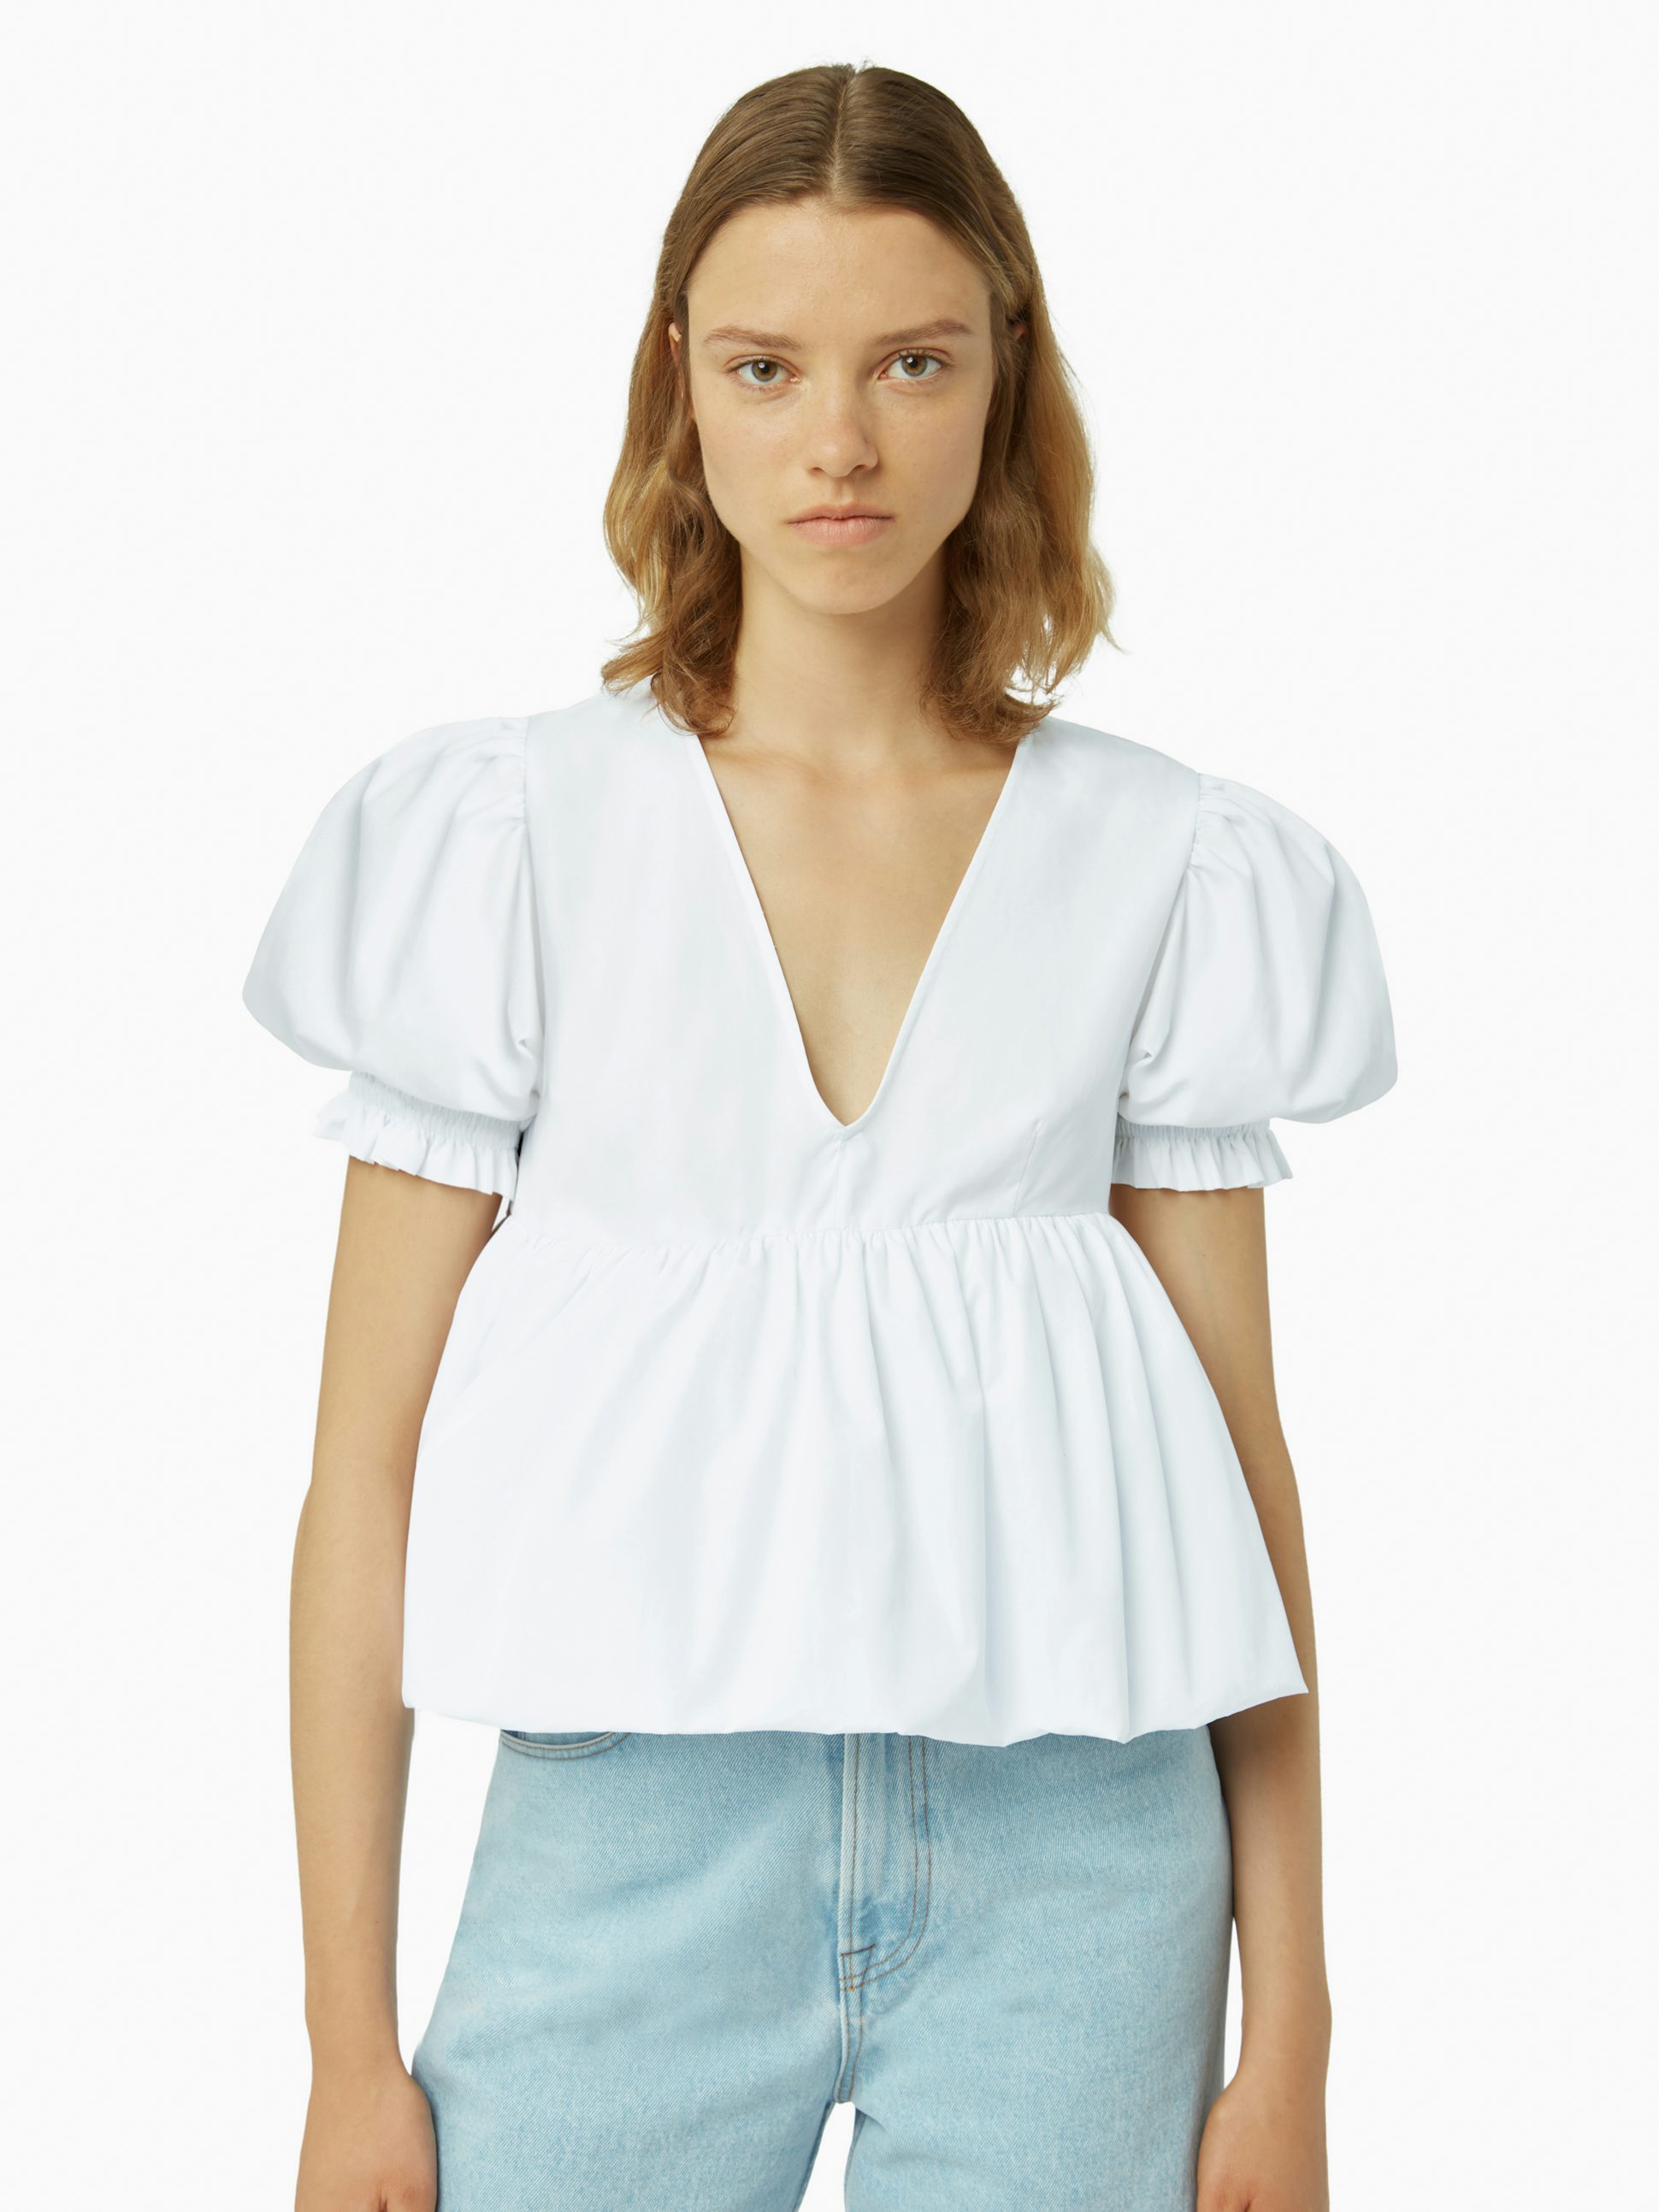 Babydoll top with ruched sleeves in white - Nina Ricci